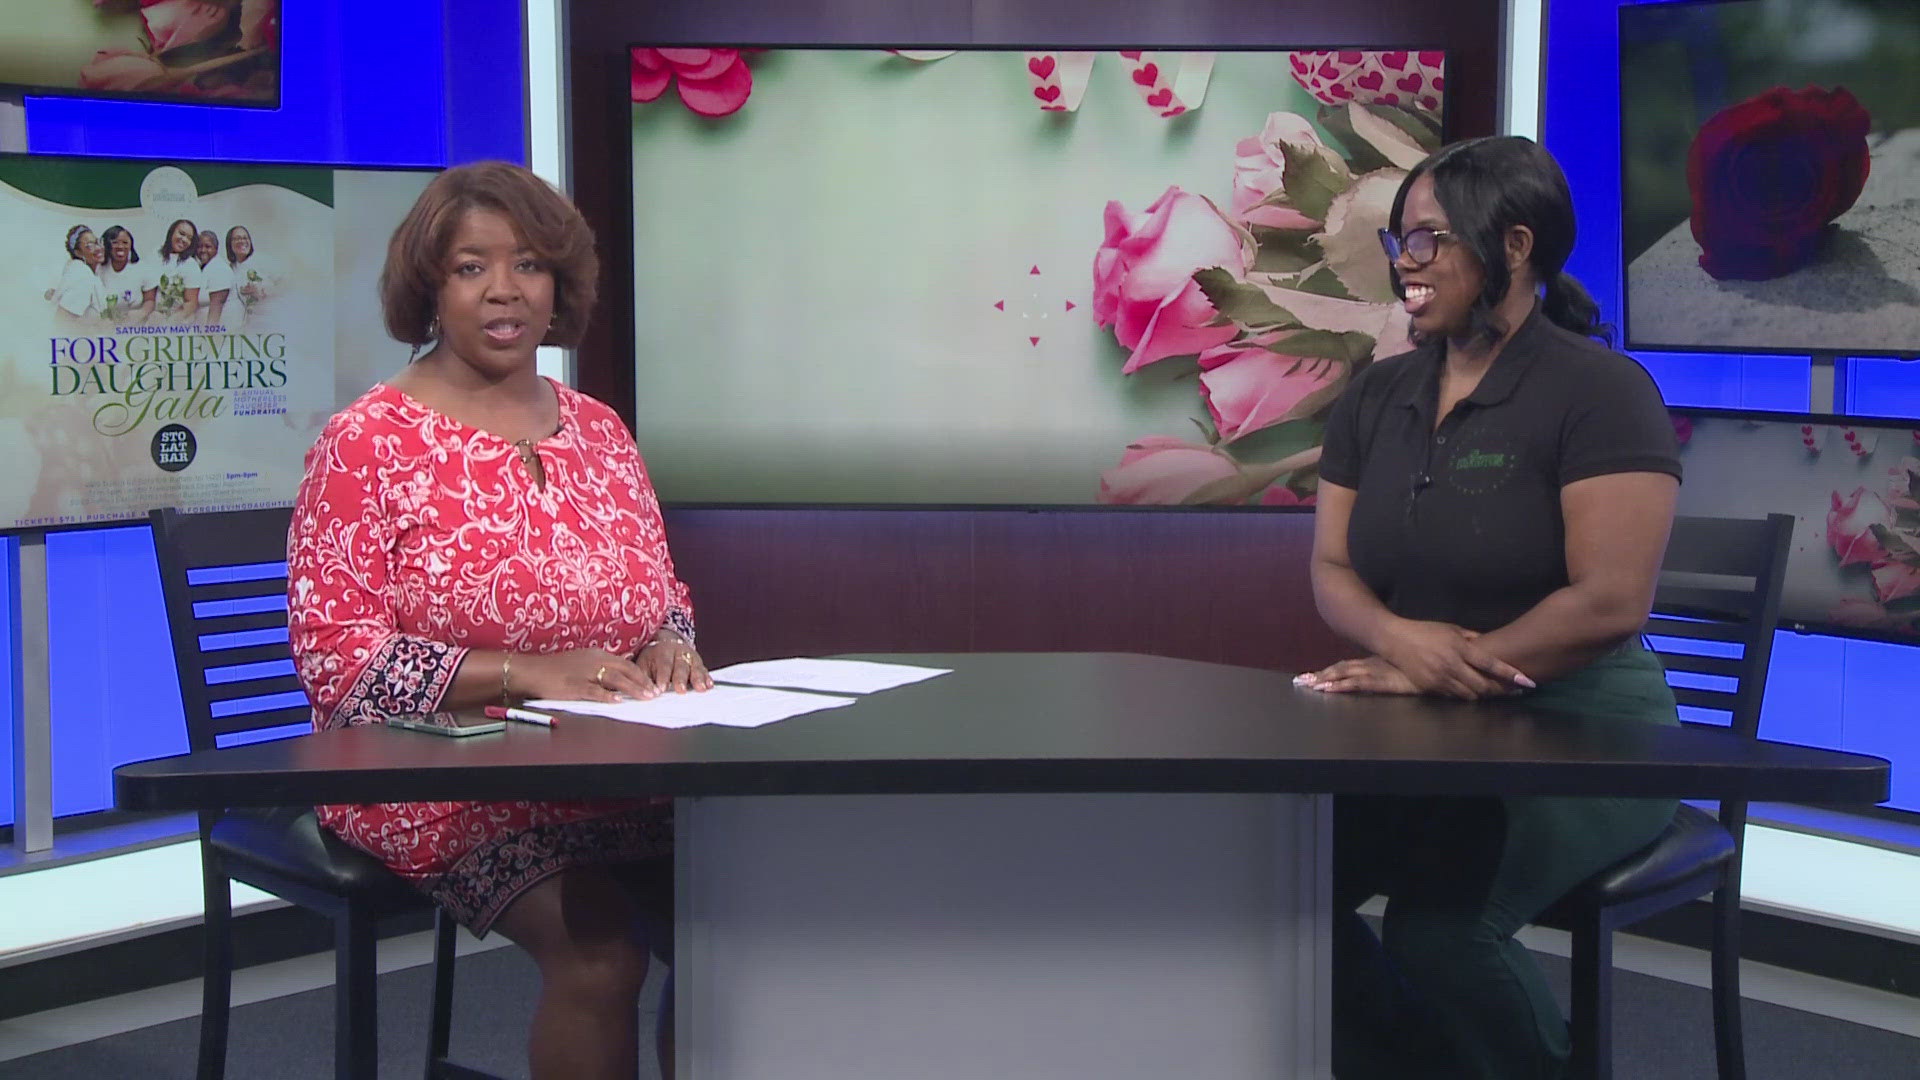 JOINING ME ON THE 5-30 IN STUDIO IS SHAI ARNOLD...
SHE IS THE FOUNDER OF FOR GRIEVING DAUGHTERS INCORPORATED.